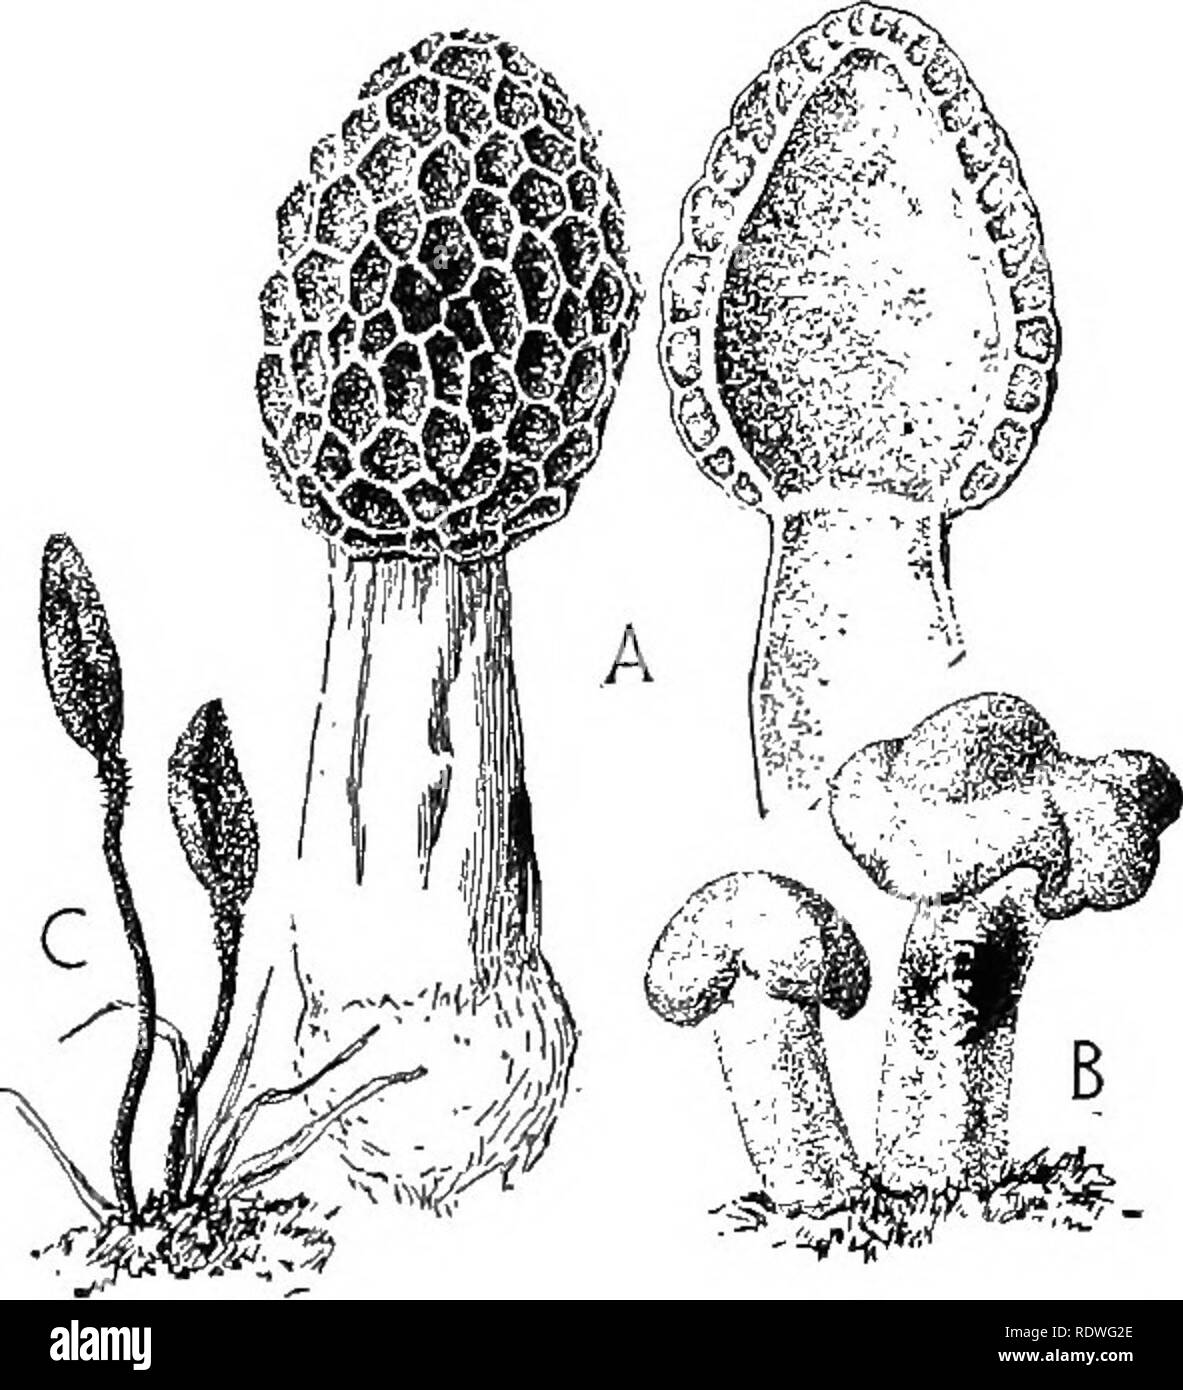 . Nature and development of plants. Botany. 232 THE ASCO-LICHENS size, forms of Morchella occasionally reaching the height of a foot and some species of Gyromitra weigh over a pound. 86. The Asco-lichens.—^A second line of departure from the Pezizales includes a large group of plants known as the lichen. The great majority of these forms show strong evidence of rela-. FiG. 141. Common forms of the Helvellales: A, the morel, Morchella, surface view at left and in section at right. The asci and paraphyses form a hymenium over the honeycomb surface. B, Leolia, a small gelatinous form of a light,  Stock Photo